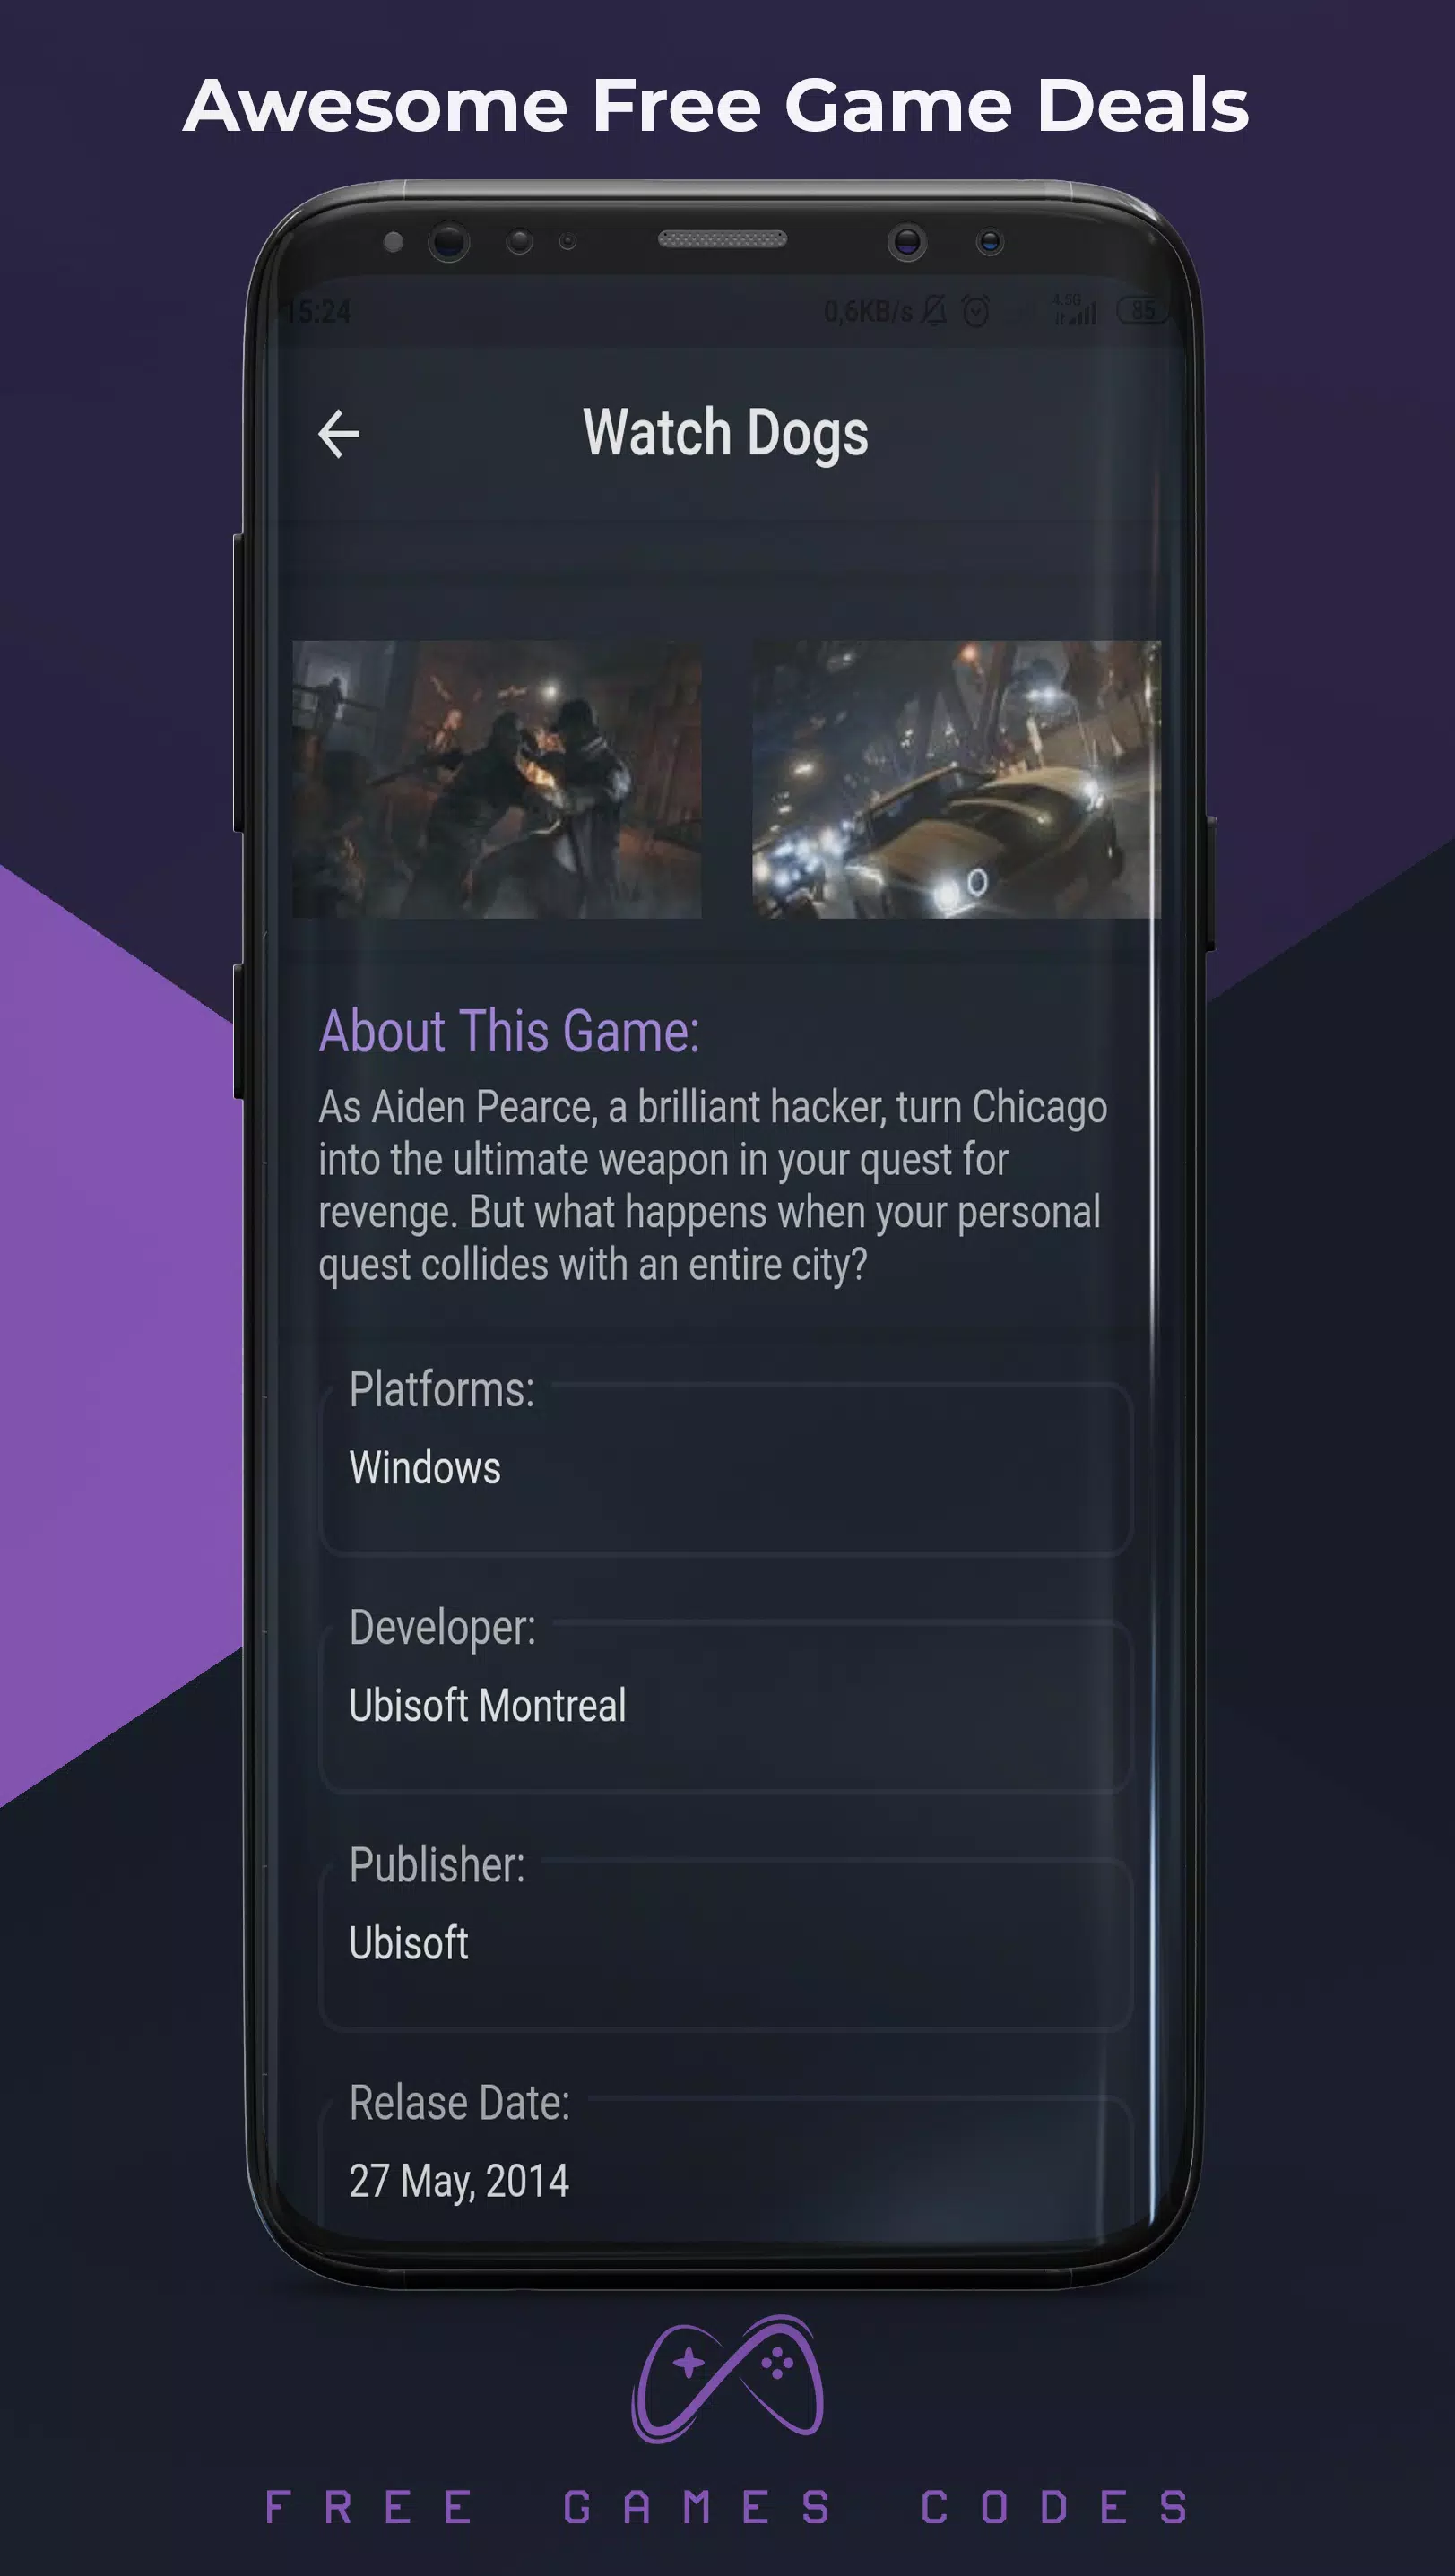 PC Games Alerts on Steam, Epic for Android - Free App Download